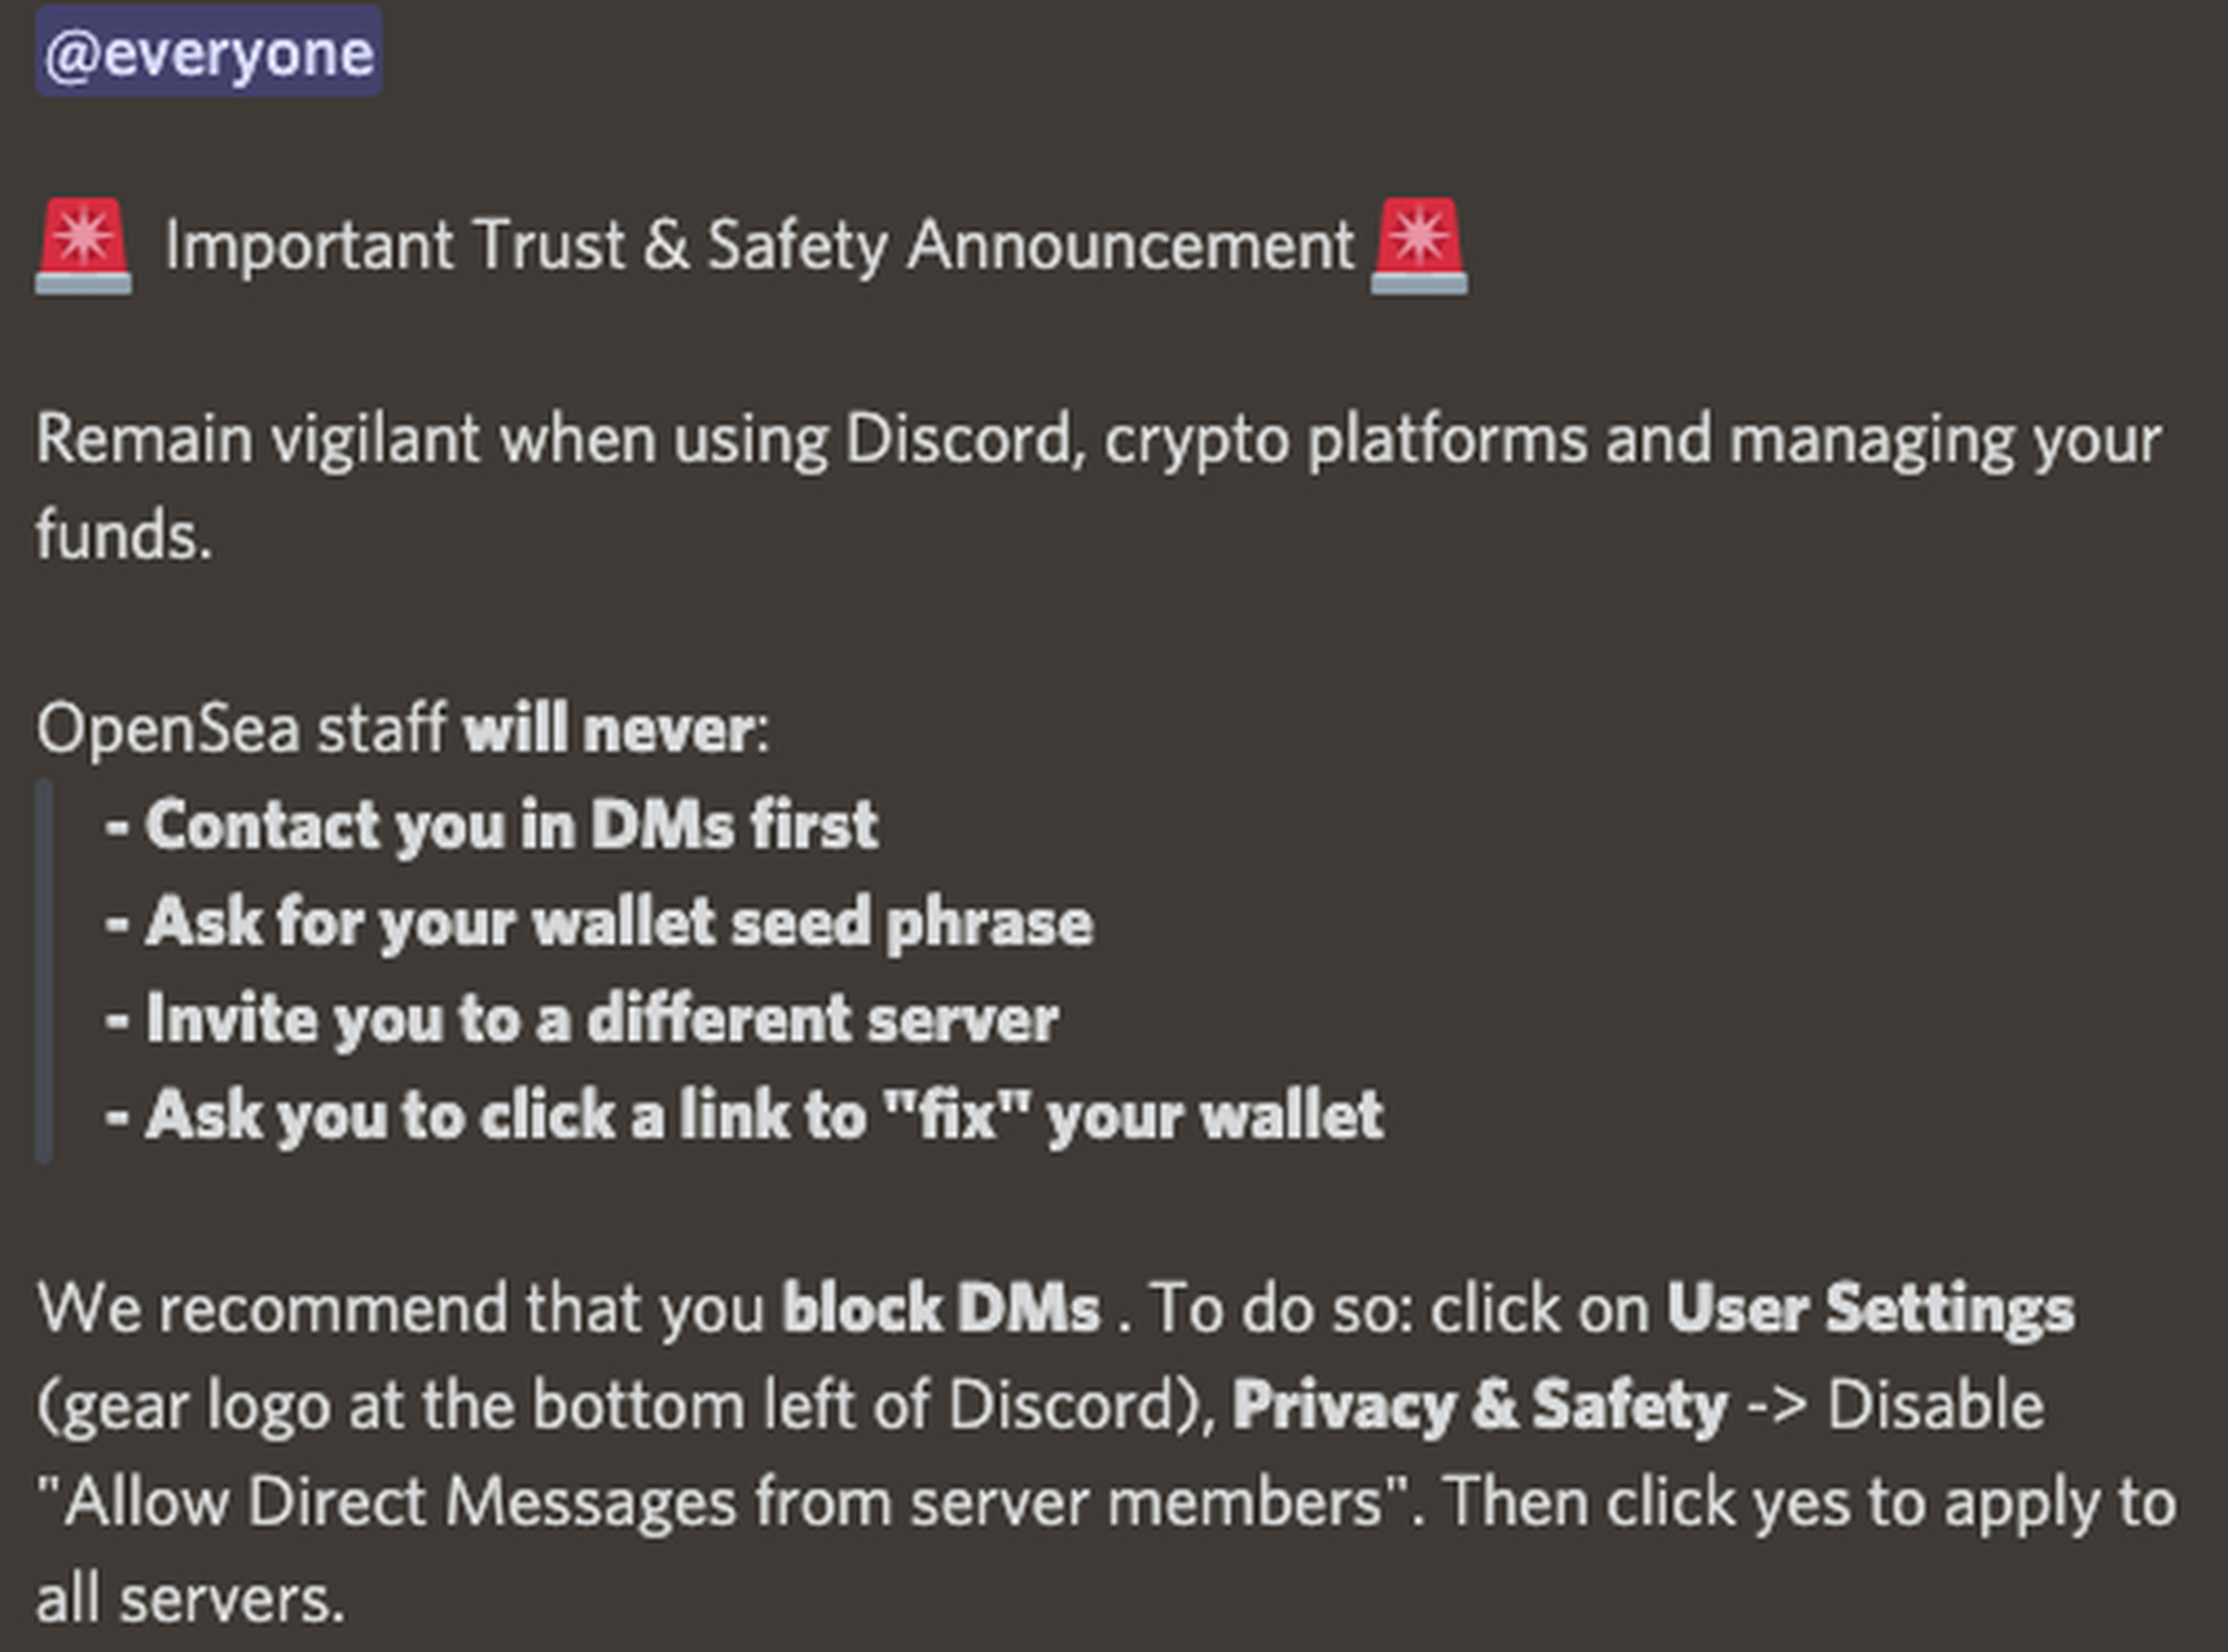 Safety announcement reads: Remain vigilant when using Discord, crypto platforms and managing your funds. OpenSea staff will never: - Contact you in DMs first - Ask for your wallet seed phrase - Invite you to a different server - Ask you to click a link to “fix” your wallet We recommend that you block DMs .